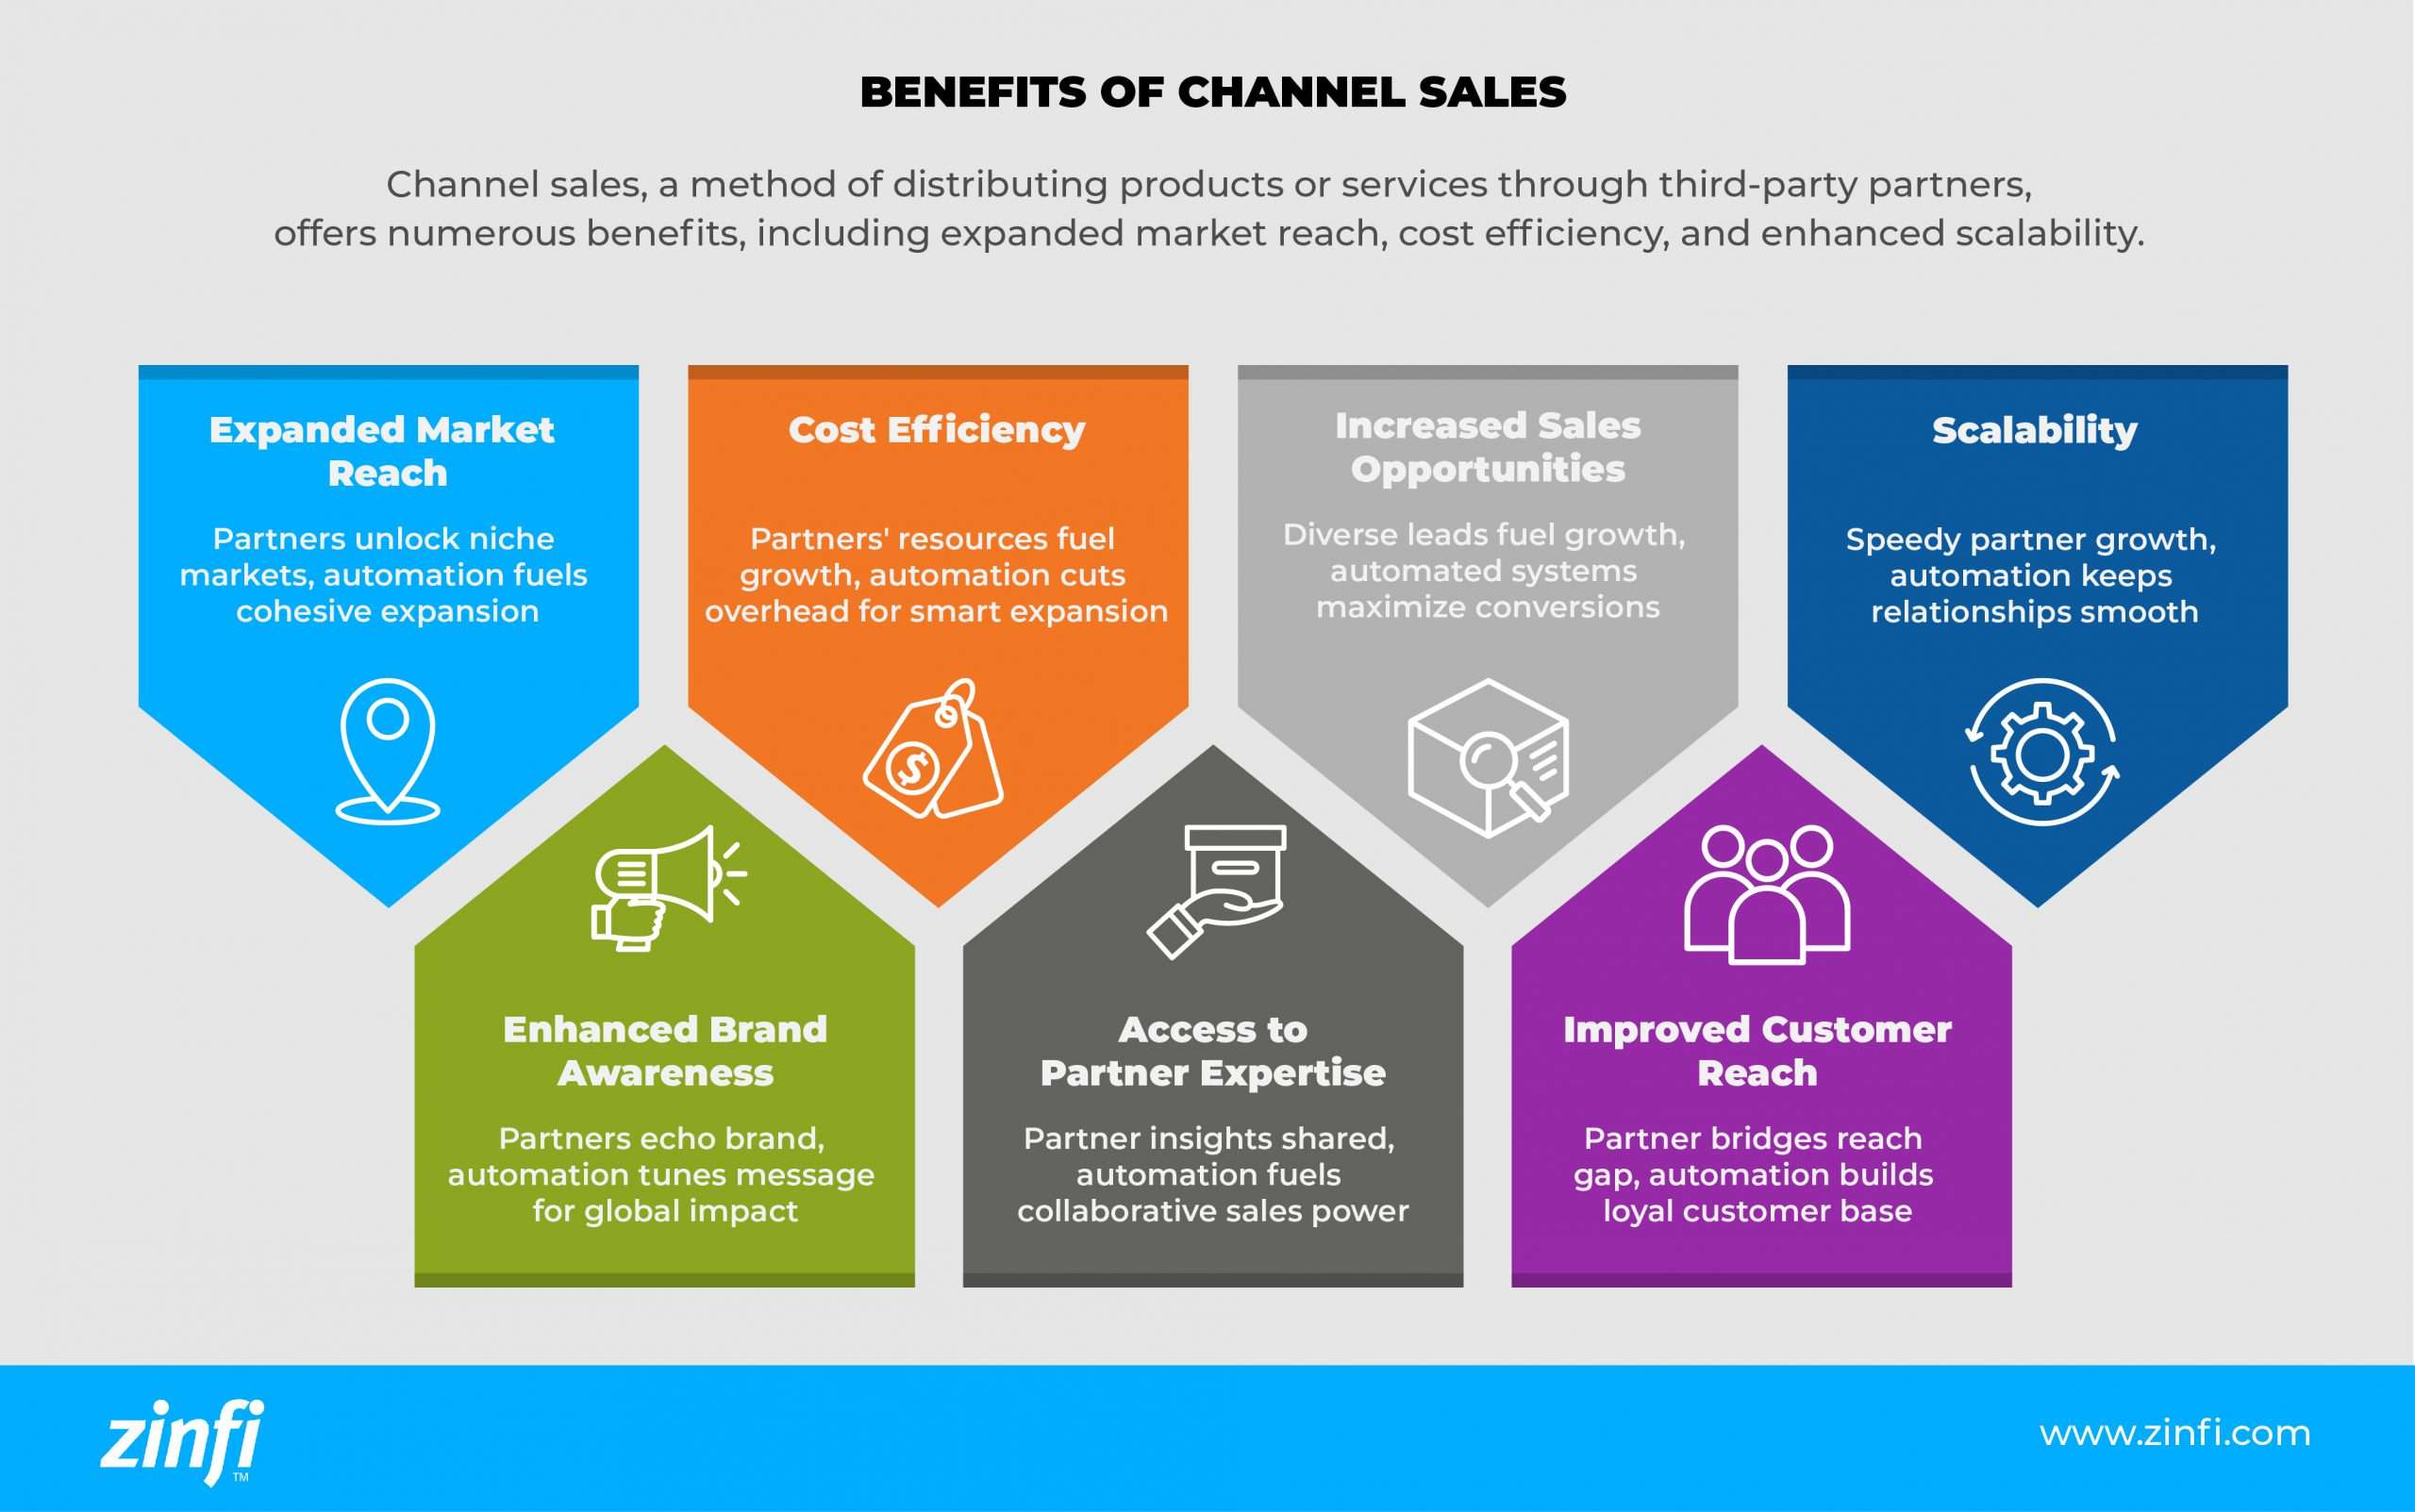 Infographic showing the benefits of Channel Sales